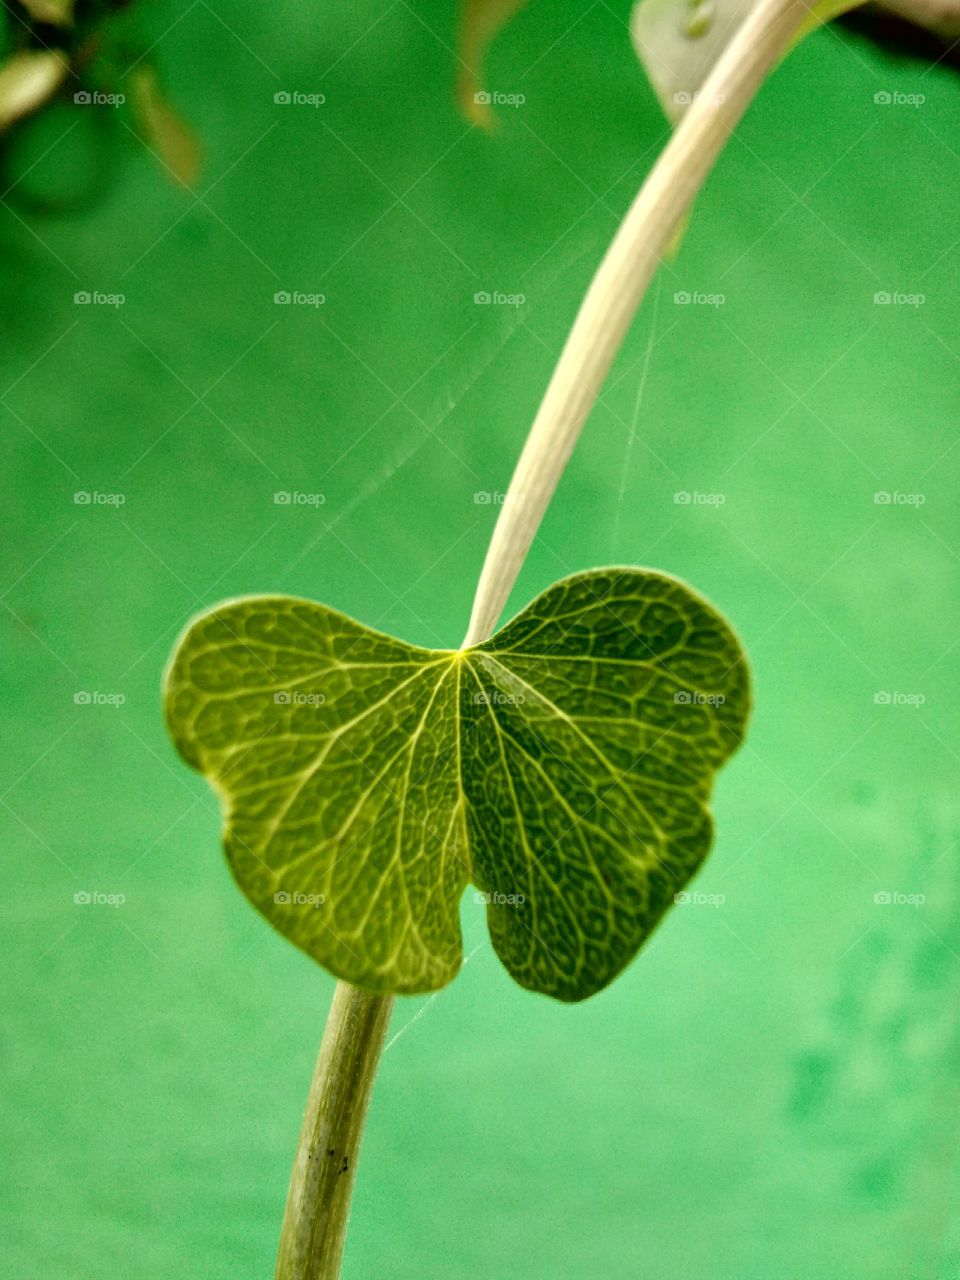 leaf is show a betterfly....a green.